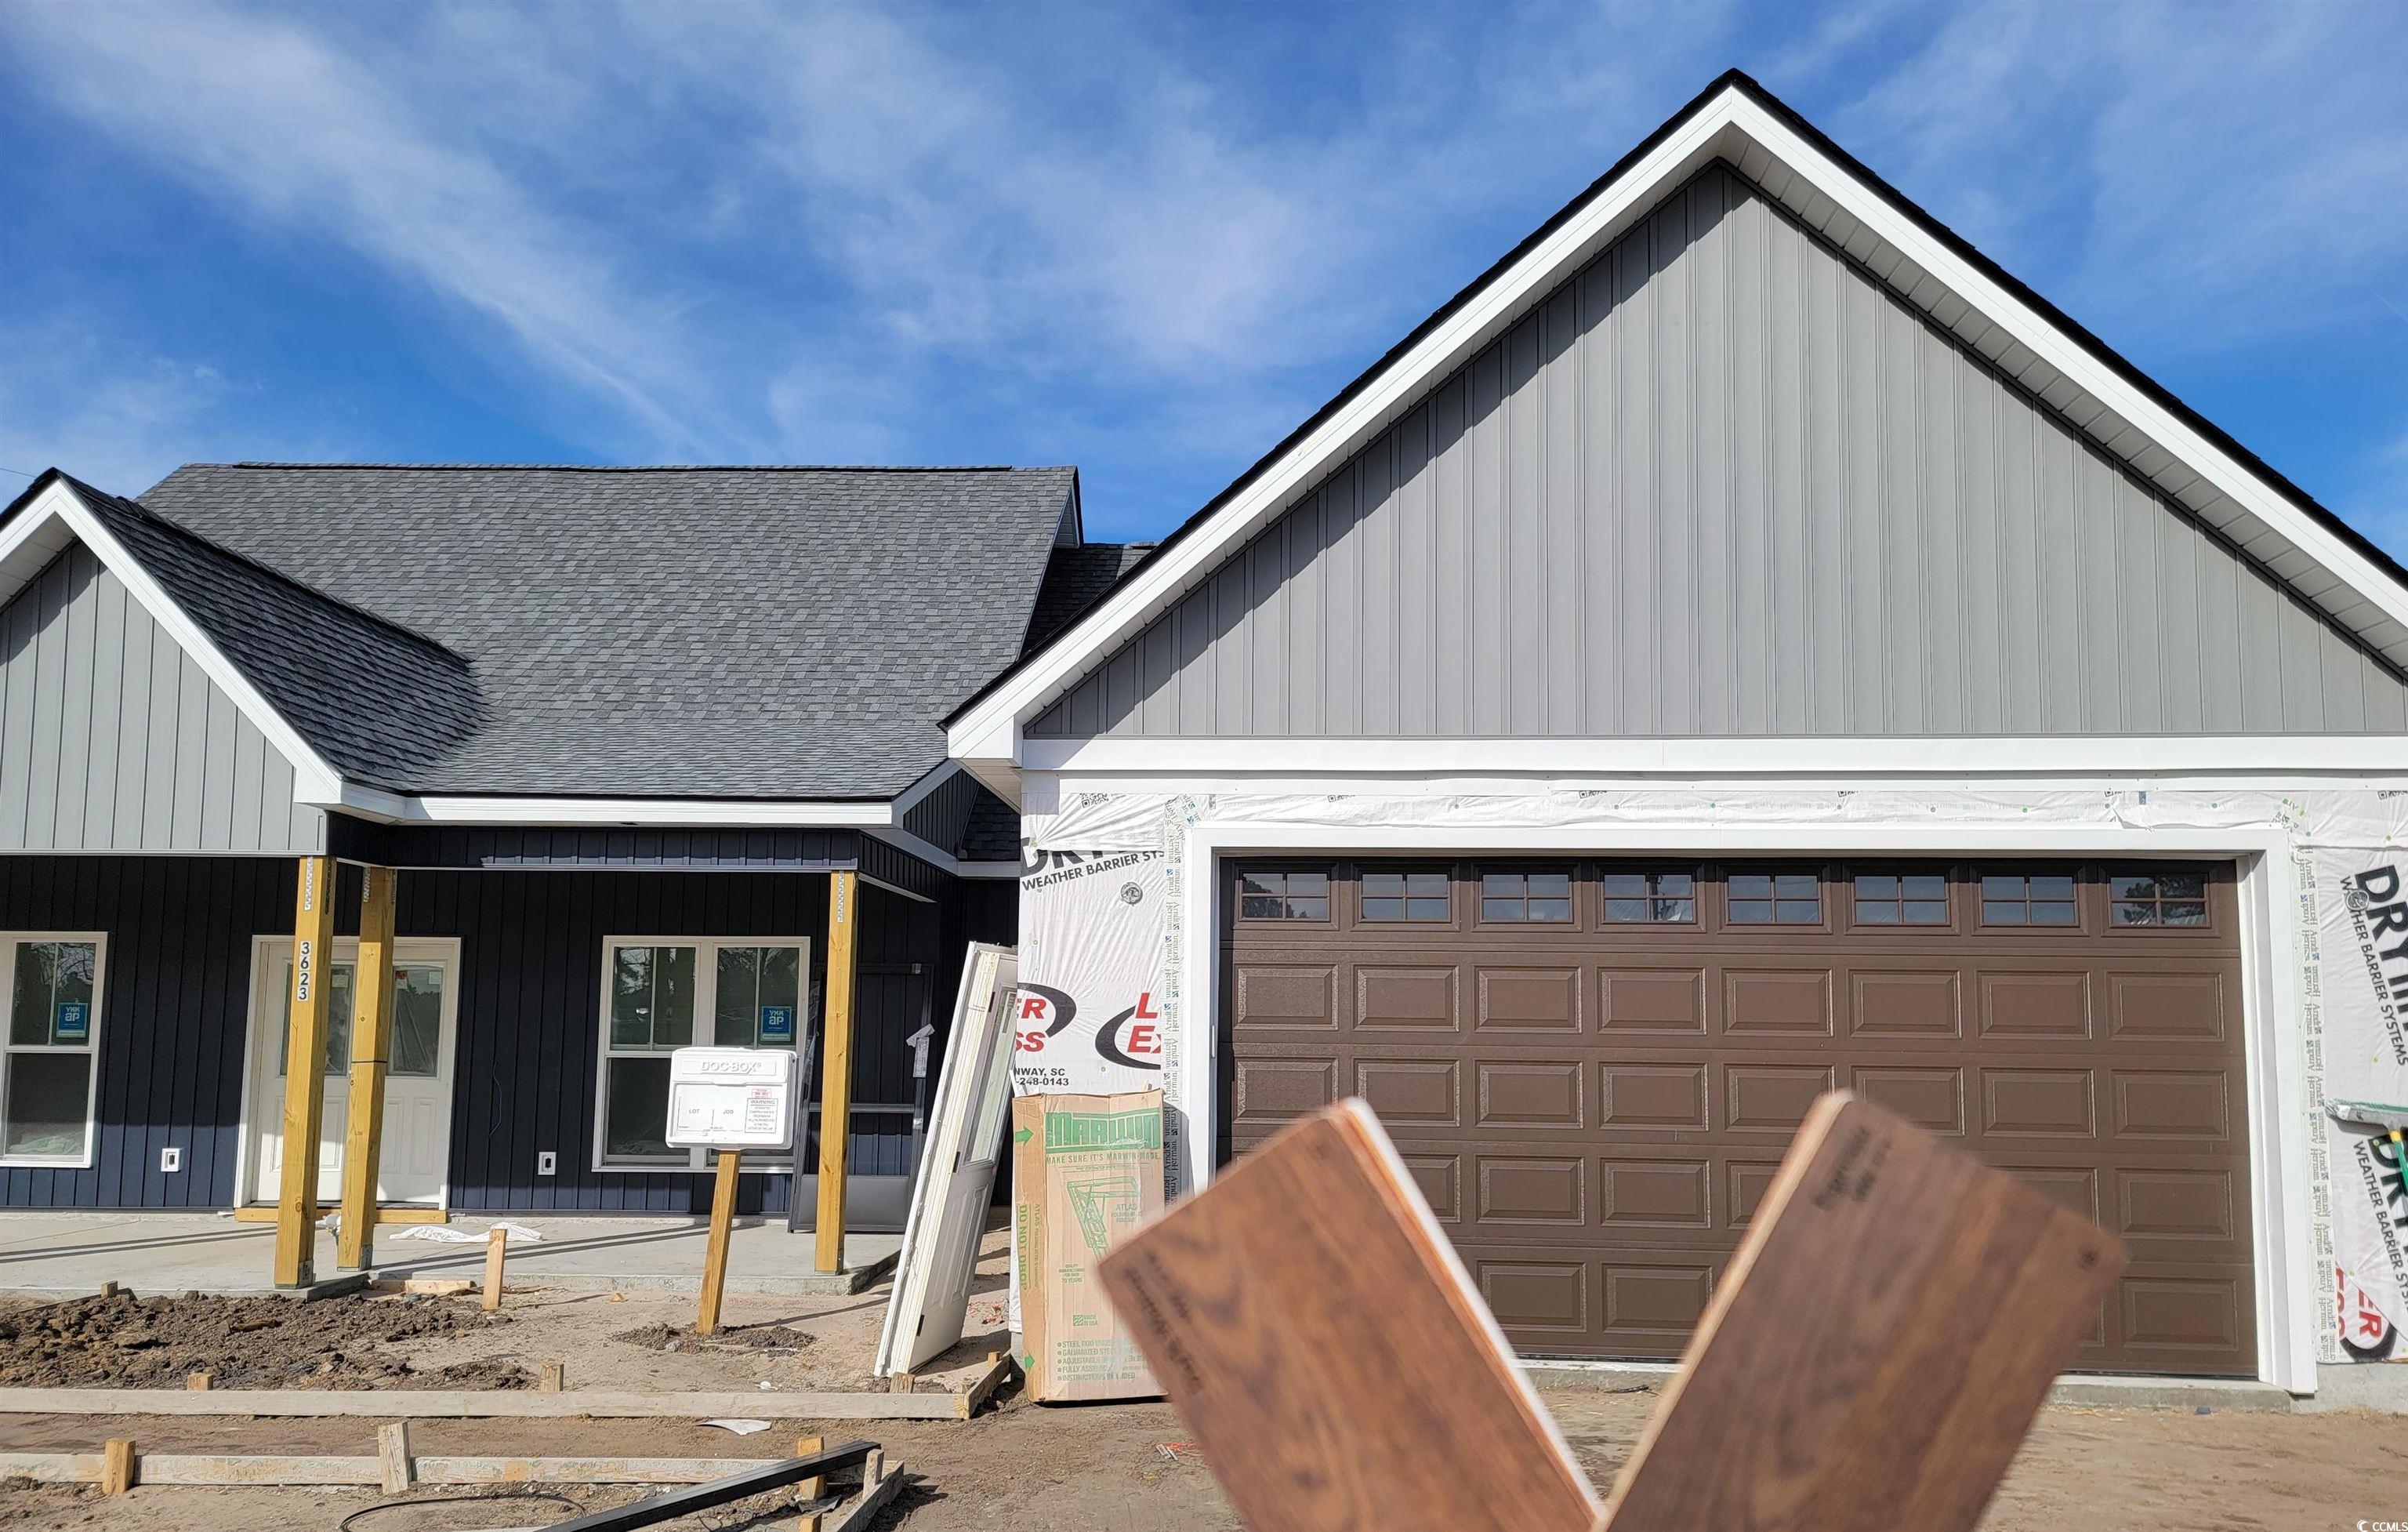 new construction to be complete in april. this 3 bed, 2.5 bath home is on a large 0.96 acre lot with no hoa in north conway. this is country living at its finest! more than enough space to add a pool or workshop, etc. bring your rvs, boats, and work vehicles! a few lots are still available / we have other floor plans. these homes have great details you won't find in a standard spec home. exterior has board & batten vinyl siding, stone accents, and stained front porch columns. quality lvp floors throughout home. the kitchen has beautiful white shaker soft-close cabinets, sold surface countertops, tiled backsplash, shiplapped kitchen work island and stainless steel appliances including a slide-in gas stove, dishwasher, microwave, and refrigerator. this home includes a front porch and screened-in back porch with ceiling fans perfect for enjoying the outdoors.  the primary bedroom has a large walk-in closet and a beautiful ensuite bathroom with a walk-in tile shower and double sink vanity.  home includes a mud bench entry from the garage, a spacious laundry room, and custom shelving pantry. landscaping includes a small fence at the driveway entry, a live oak tree in the front yard and landscaping around the home. long driveway will include crushed asphalt with concrete pad at the garage and sidewalk to the front door. more photos to come. owner is also listing agent. more lots are available / we have other floor plans.